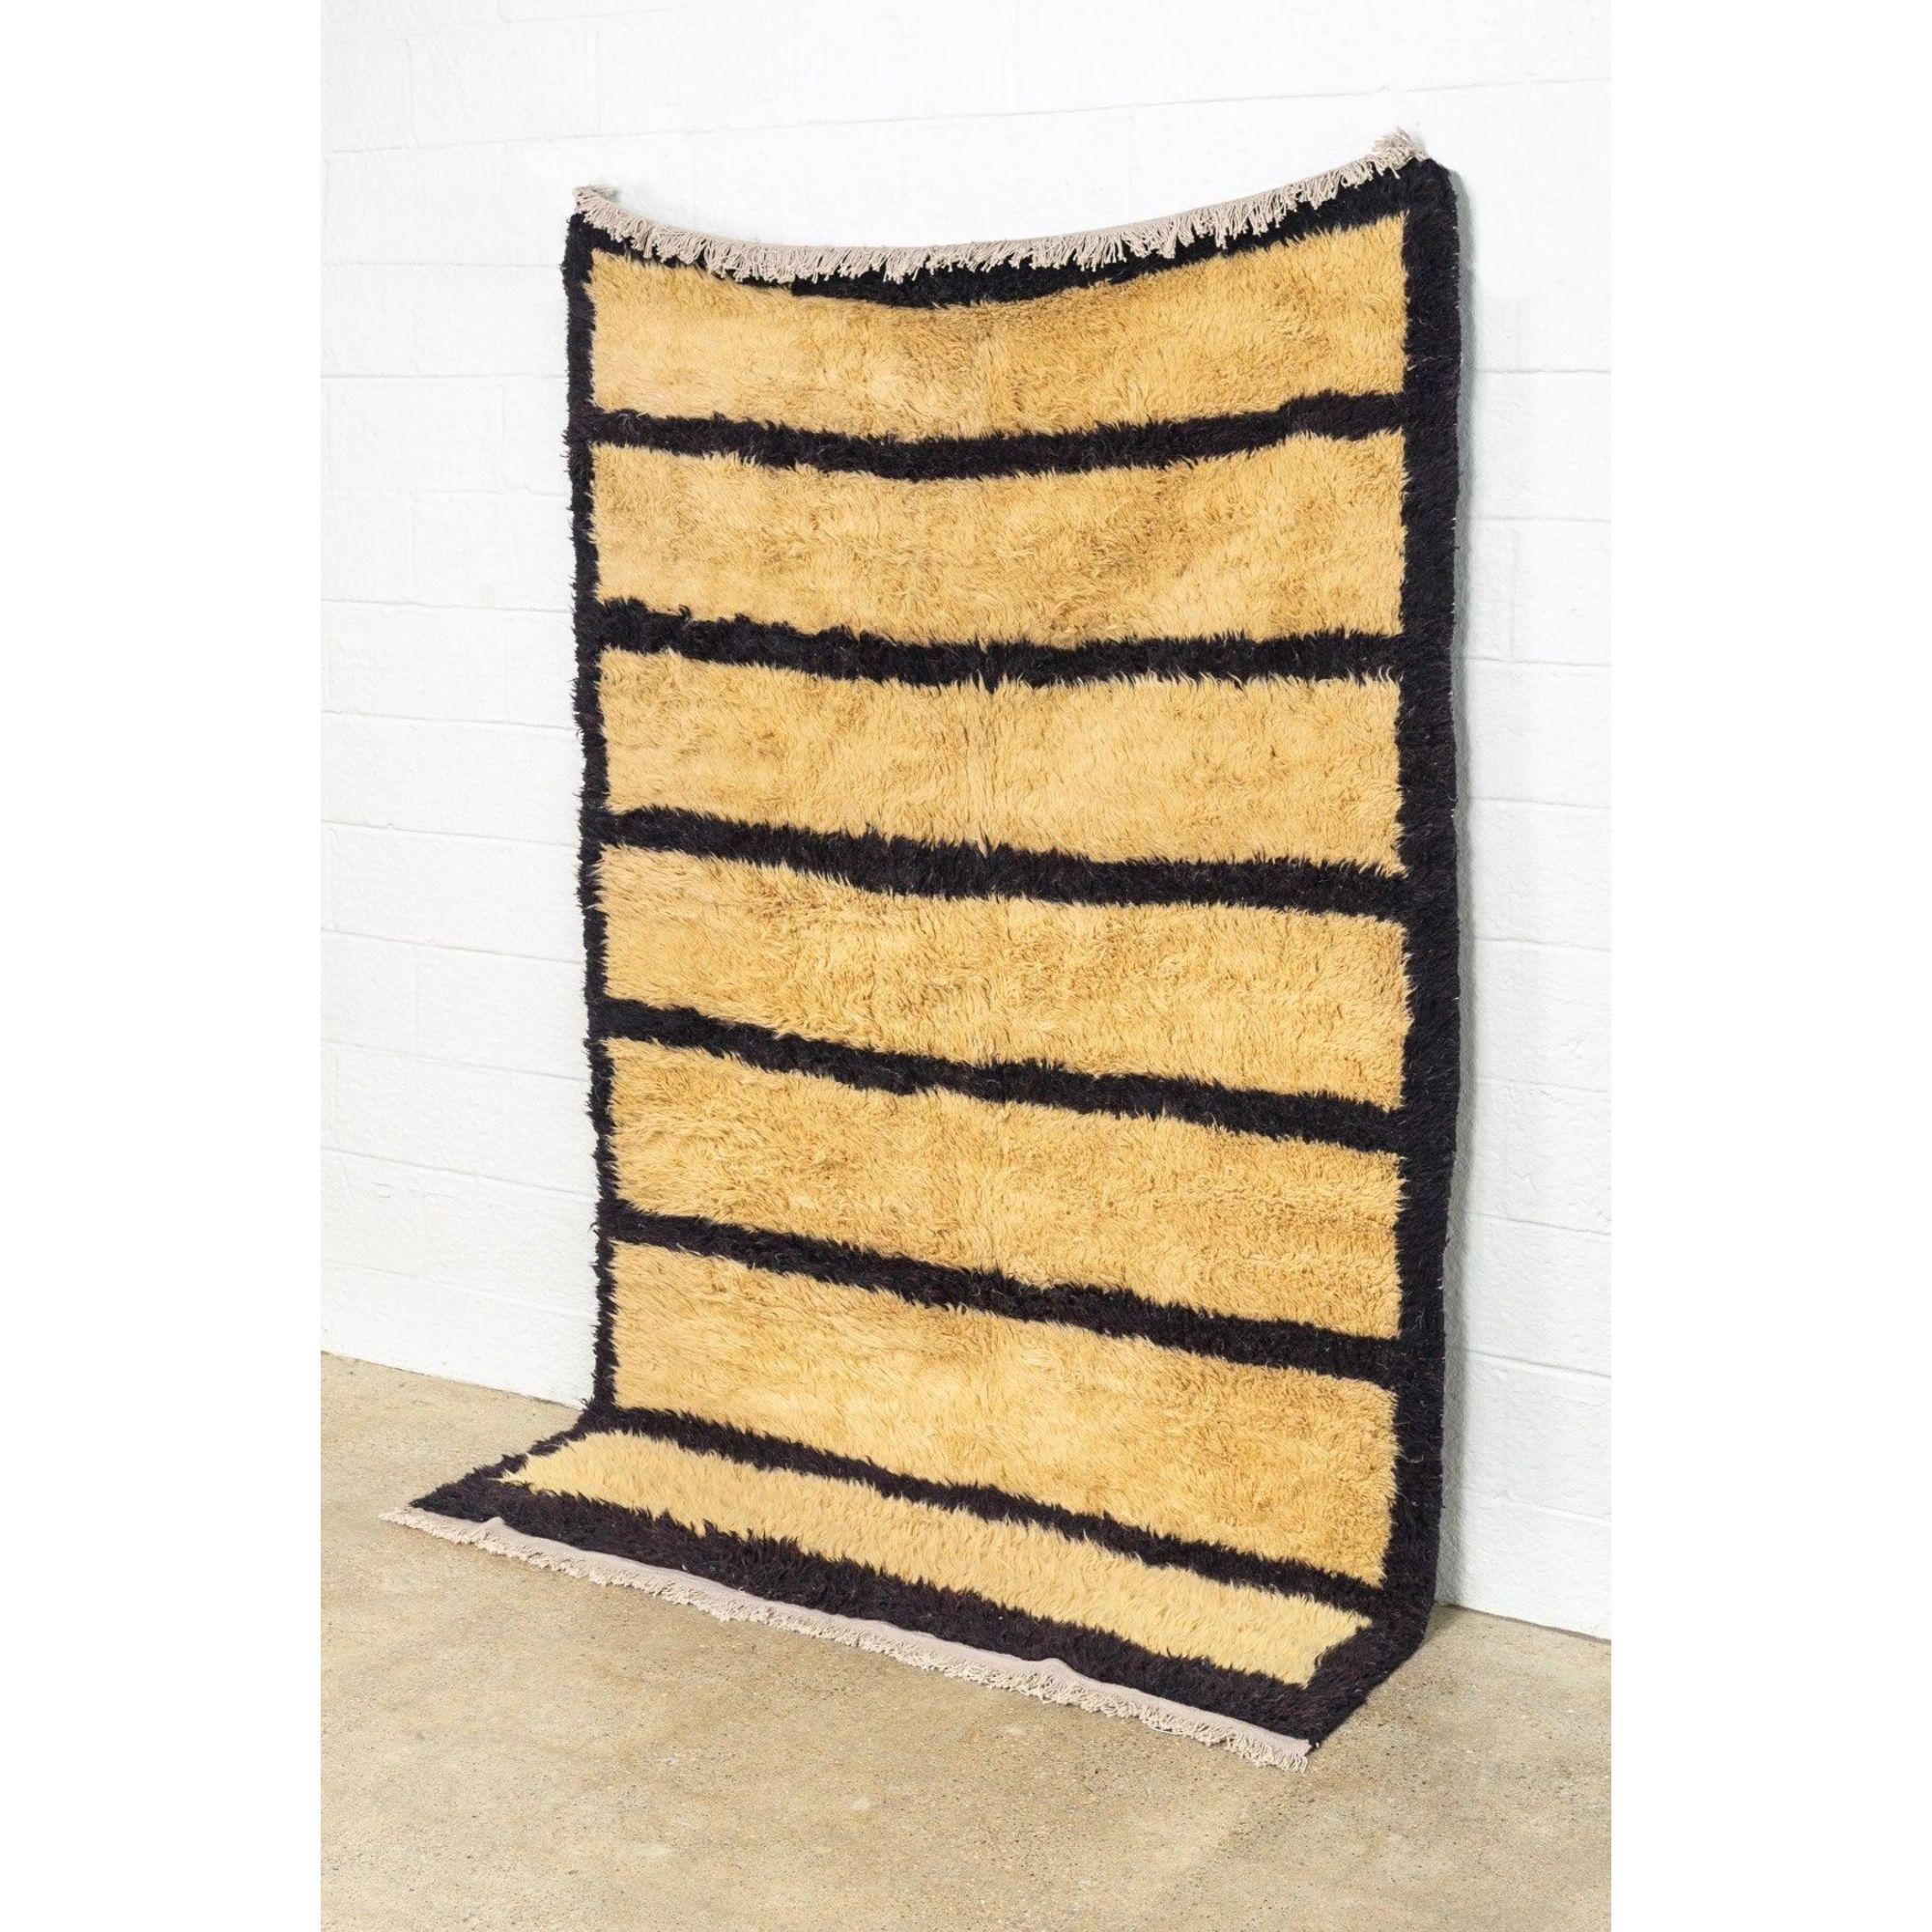 This vintage handwoven Anatolian wool floor rug features an abstract, Minimalist design with an open beige field and brown-black stripes and border edge. The shaggy wool pile is soft and luxurious and finished with a natural cotton warp fringe to